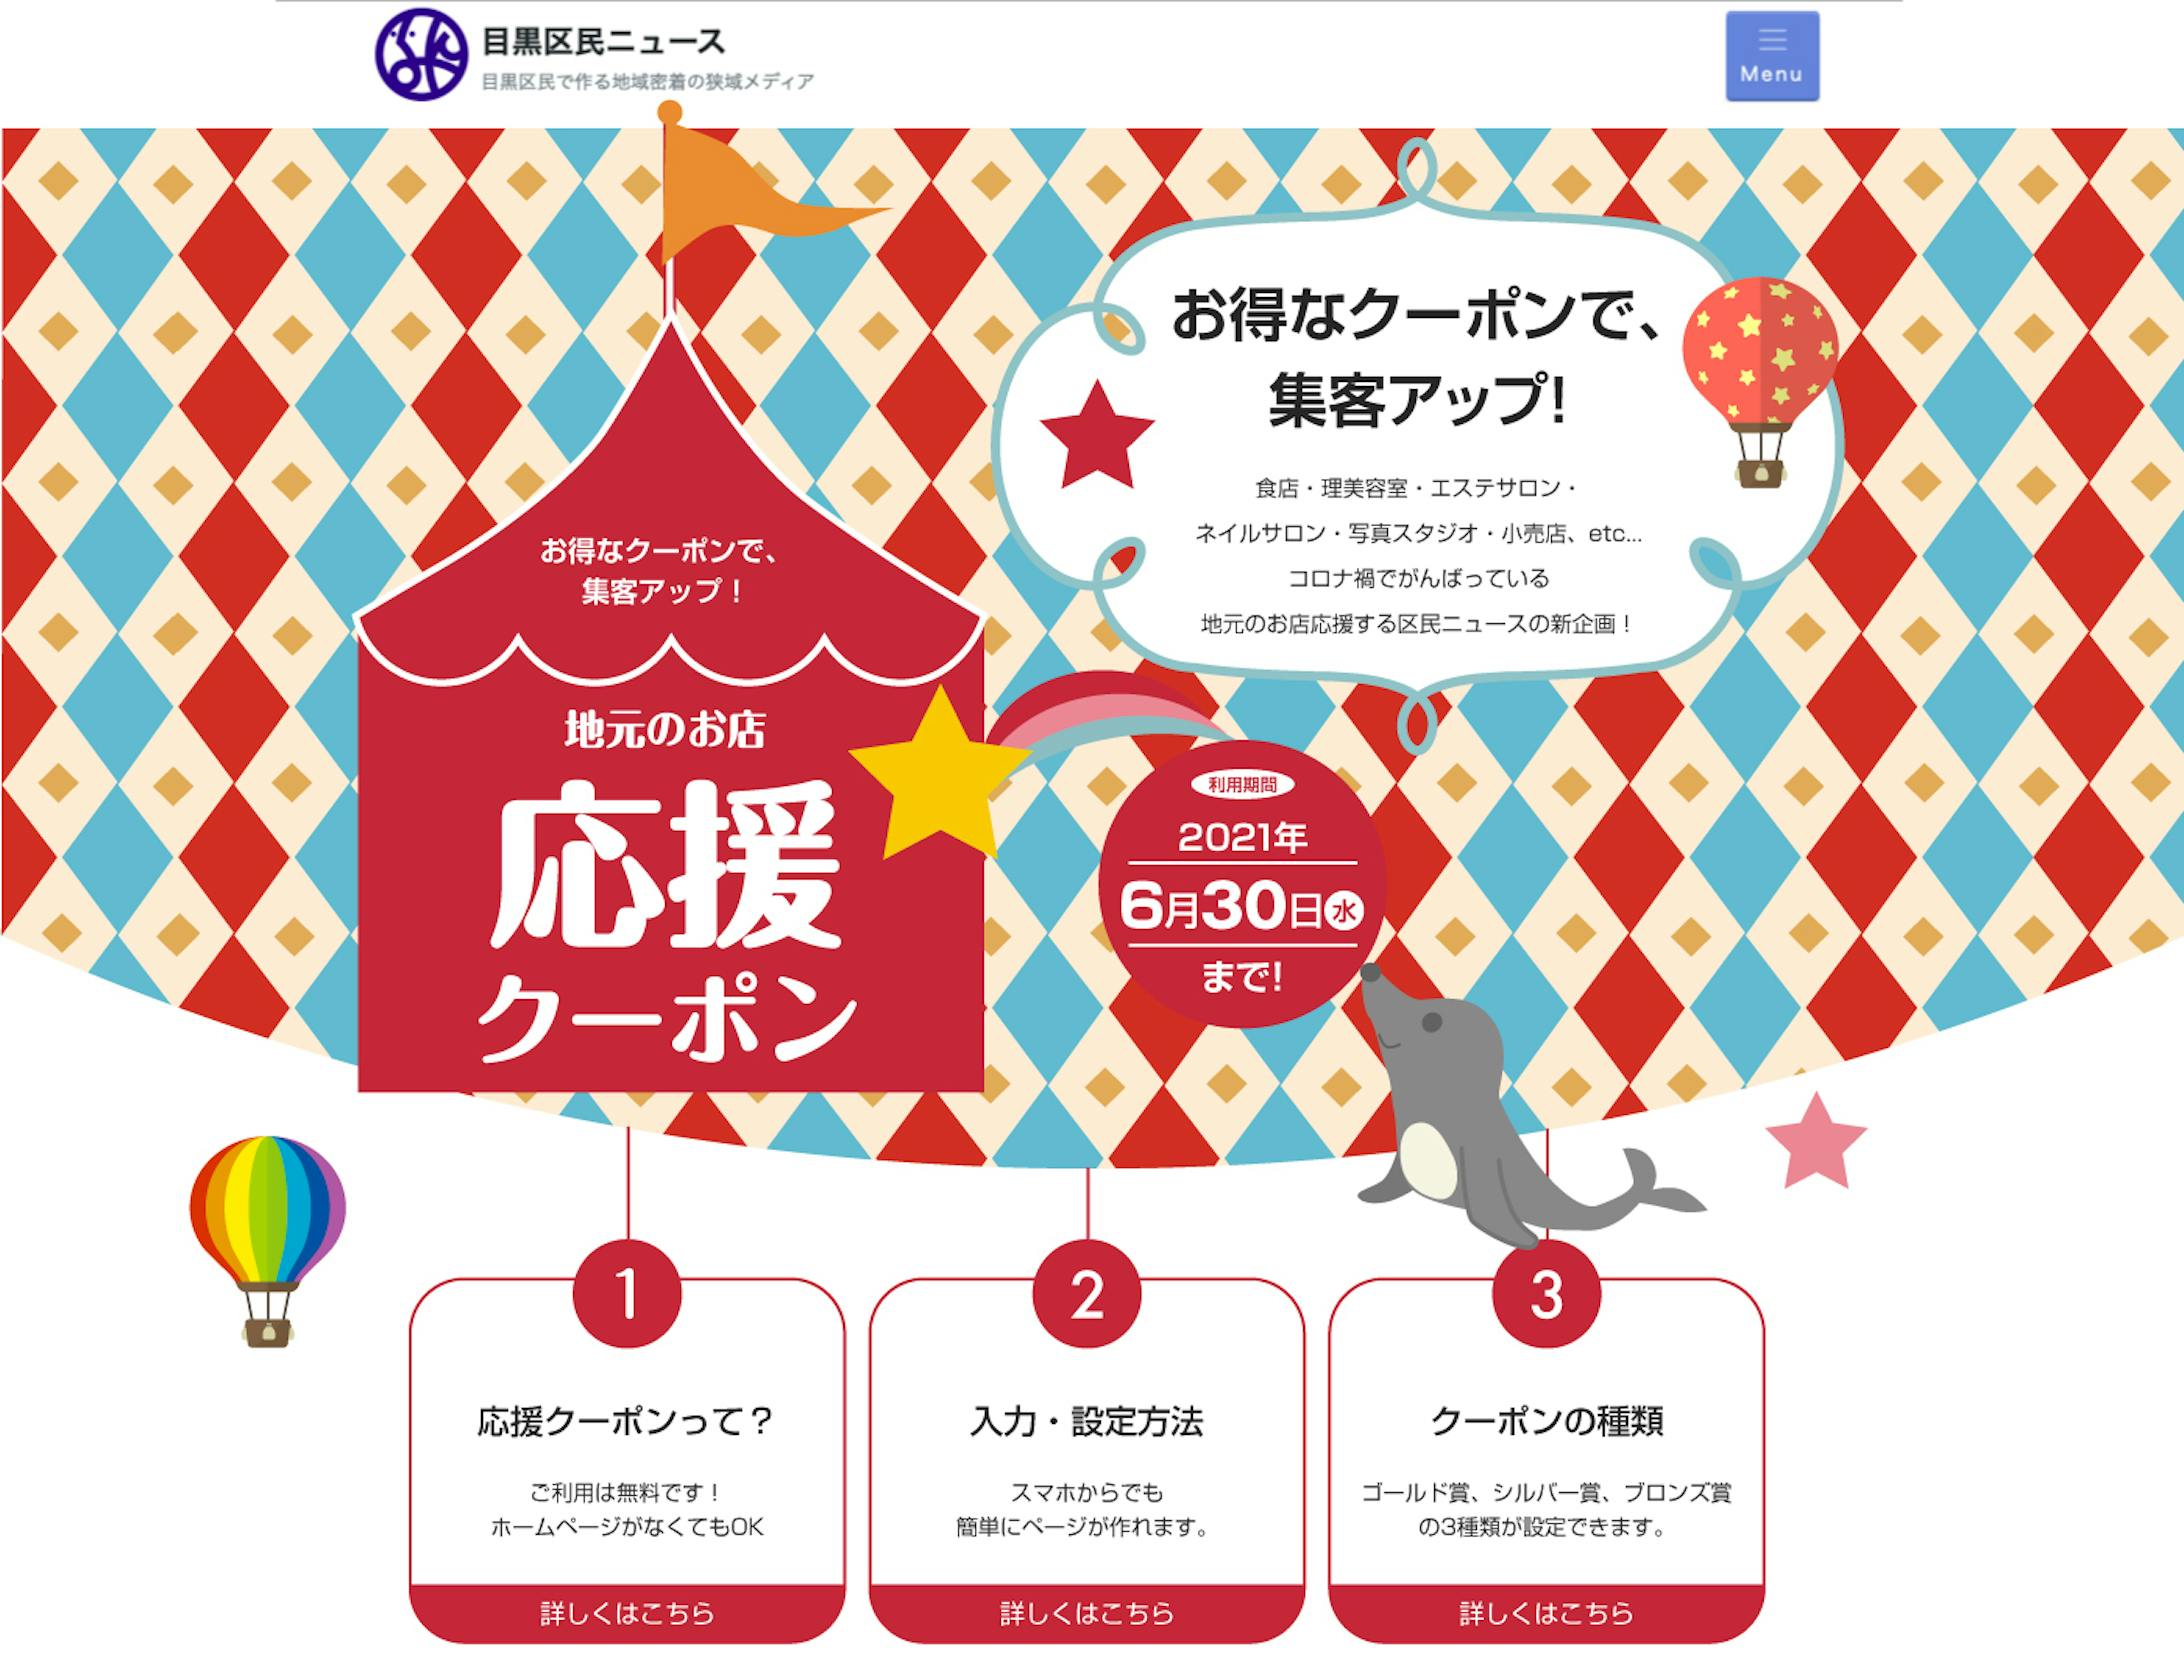 Tokyo ward residents' website Local shop support coupon-2